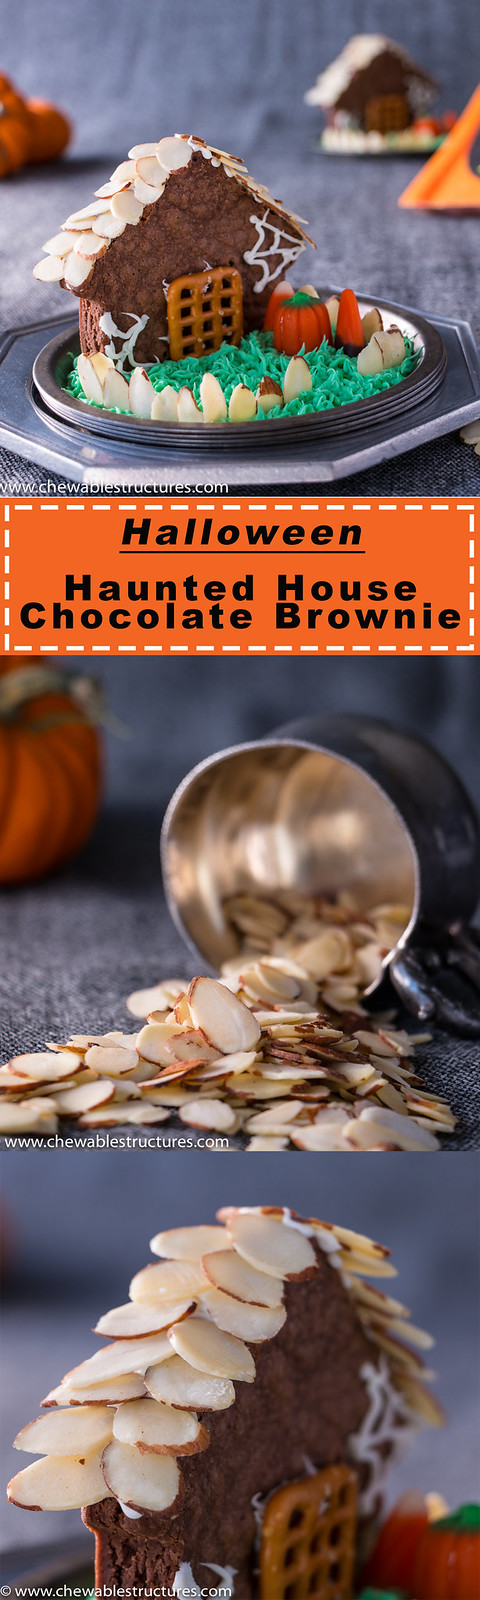 This Halloween Haunted House Chocolate Brownie With Shaved Almonds Will Scare Your Friends - Chewable Structures: Happy Halloween! It’s time to scare your loved ones with sweet treats, like this haunted house made of chocolate brownies, California almonds, frosting, and let’s not forget– candy corn. This fun and easy dessert recipe only takes a few minutes and will scare your friends with sweetness.